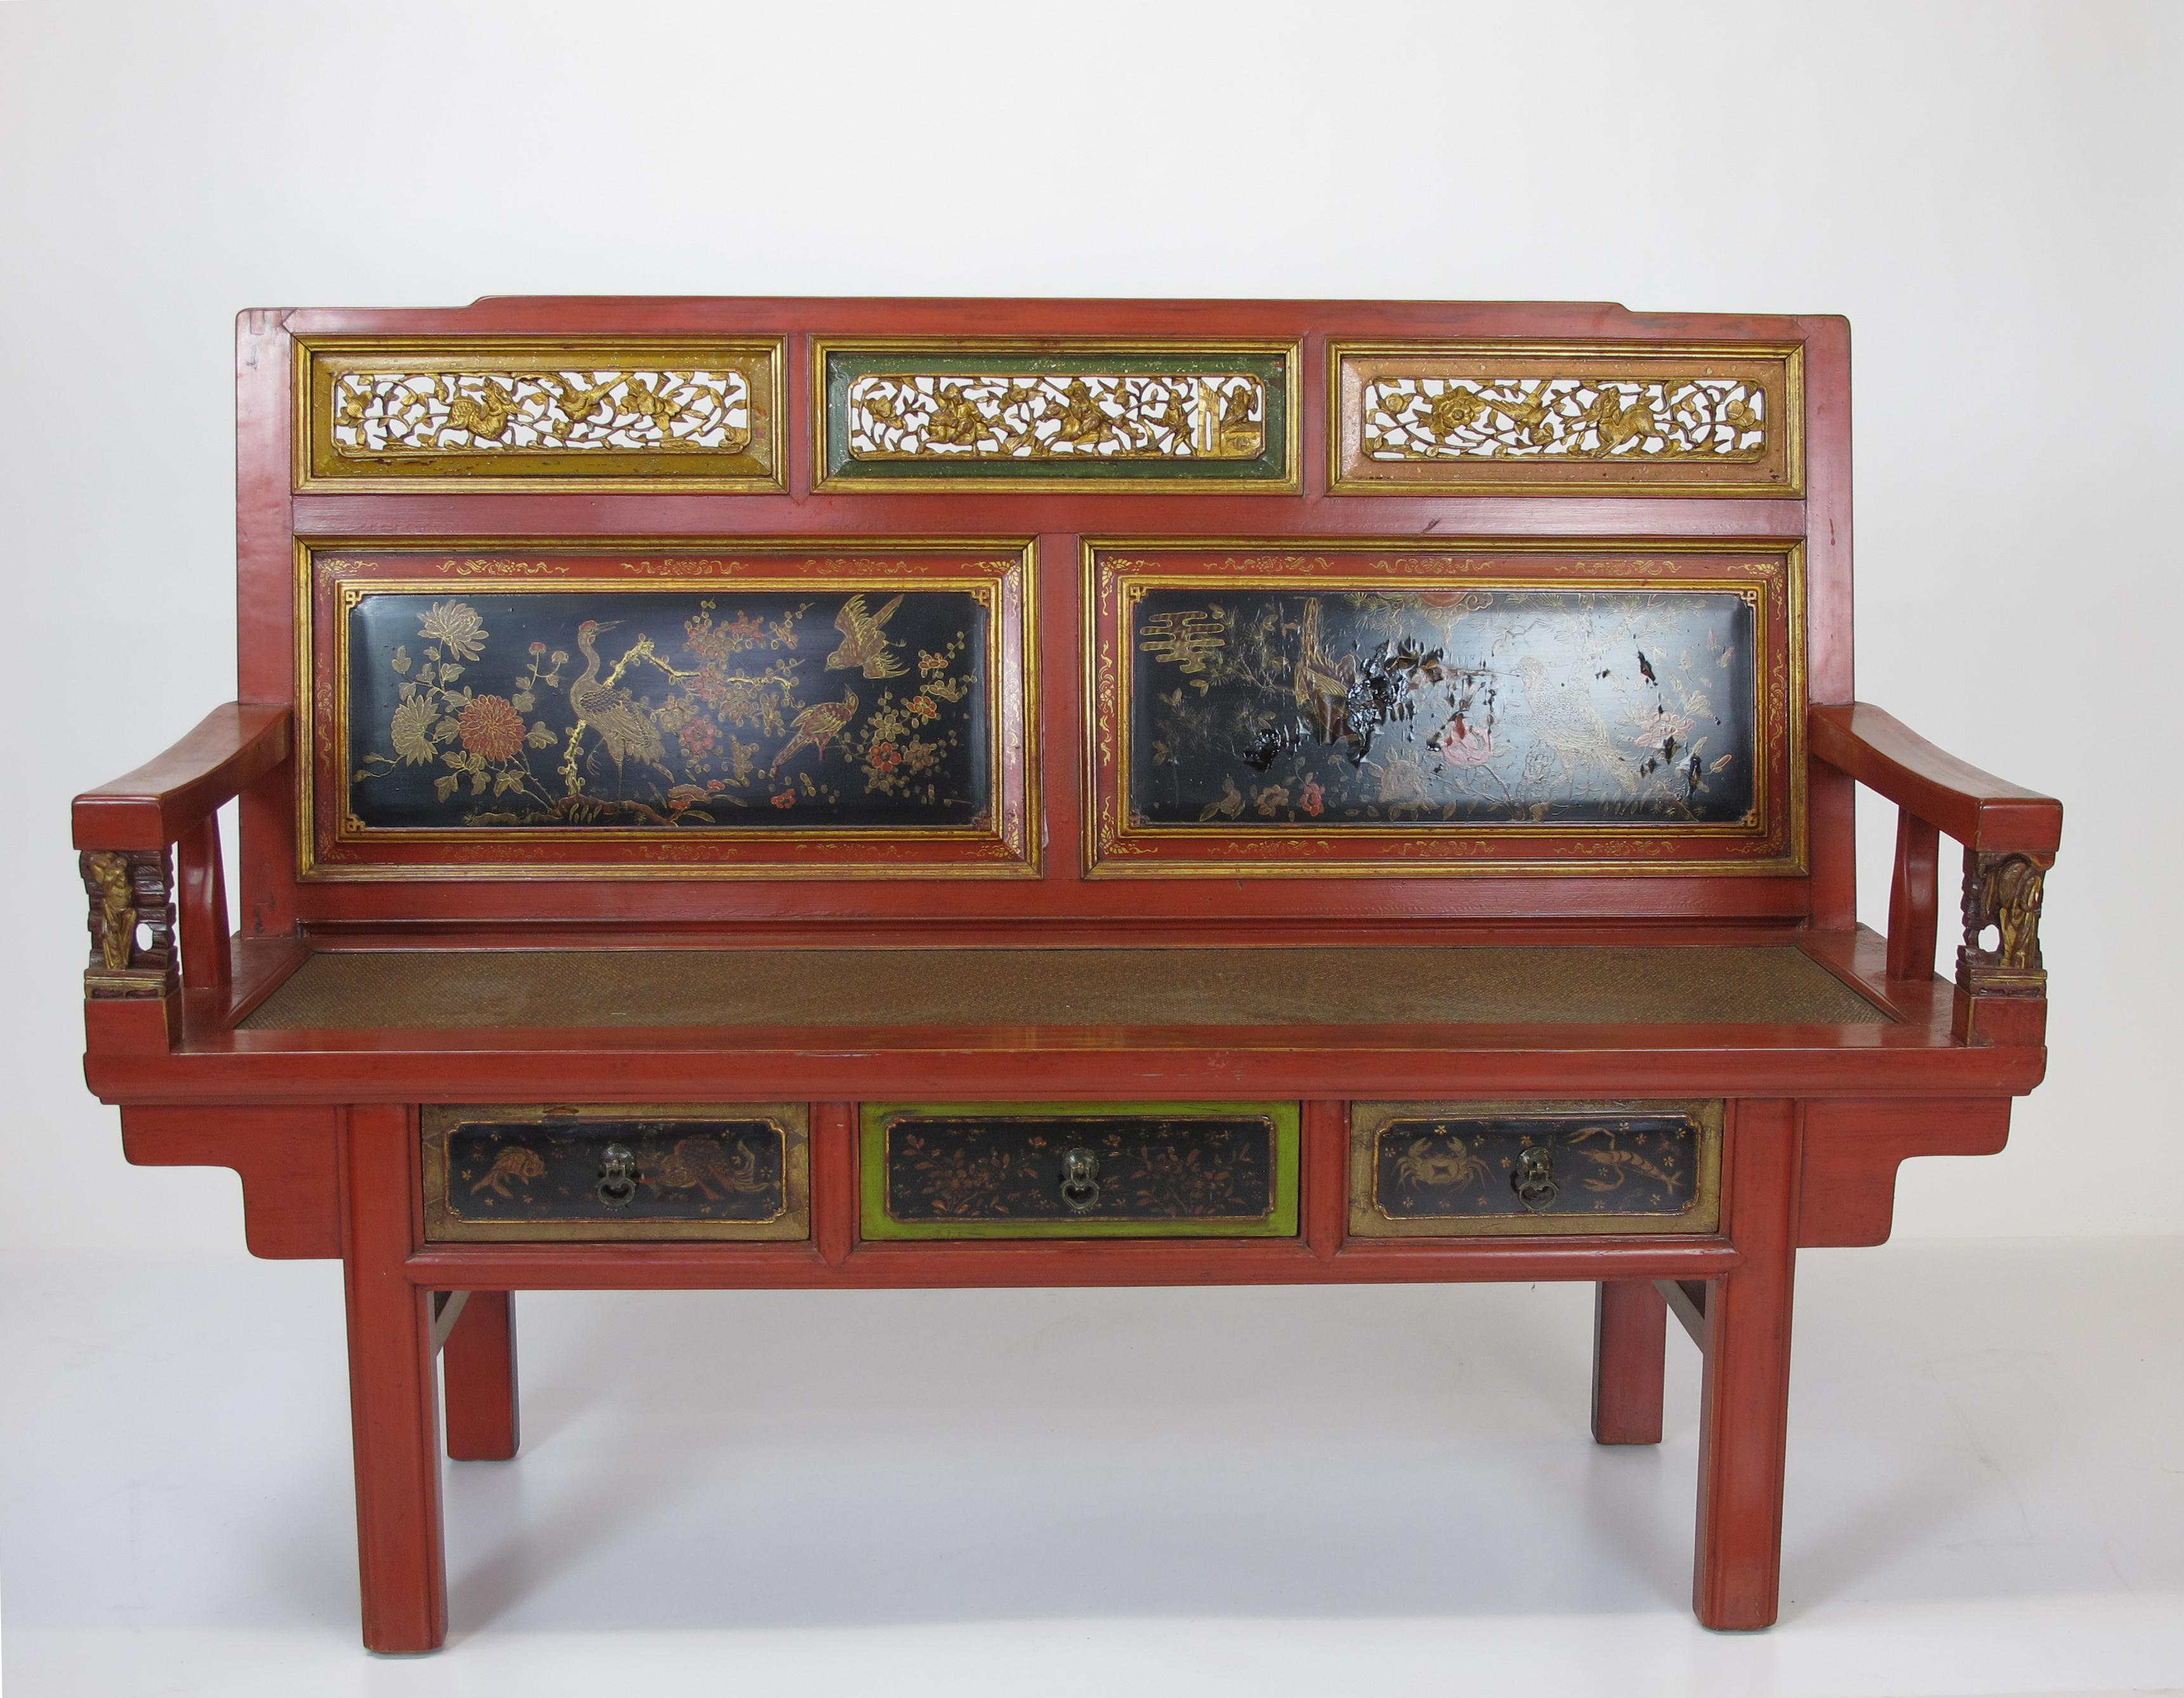 The red frame highlights beautiful gilded hand painted and carved back. It has 3 drawers under the seat with gilded painting and 2 small carved in front the armrest. This antique Southern style antique bench makes an adorable addition in any room.